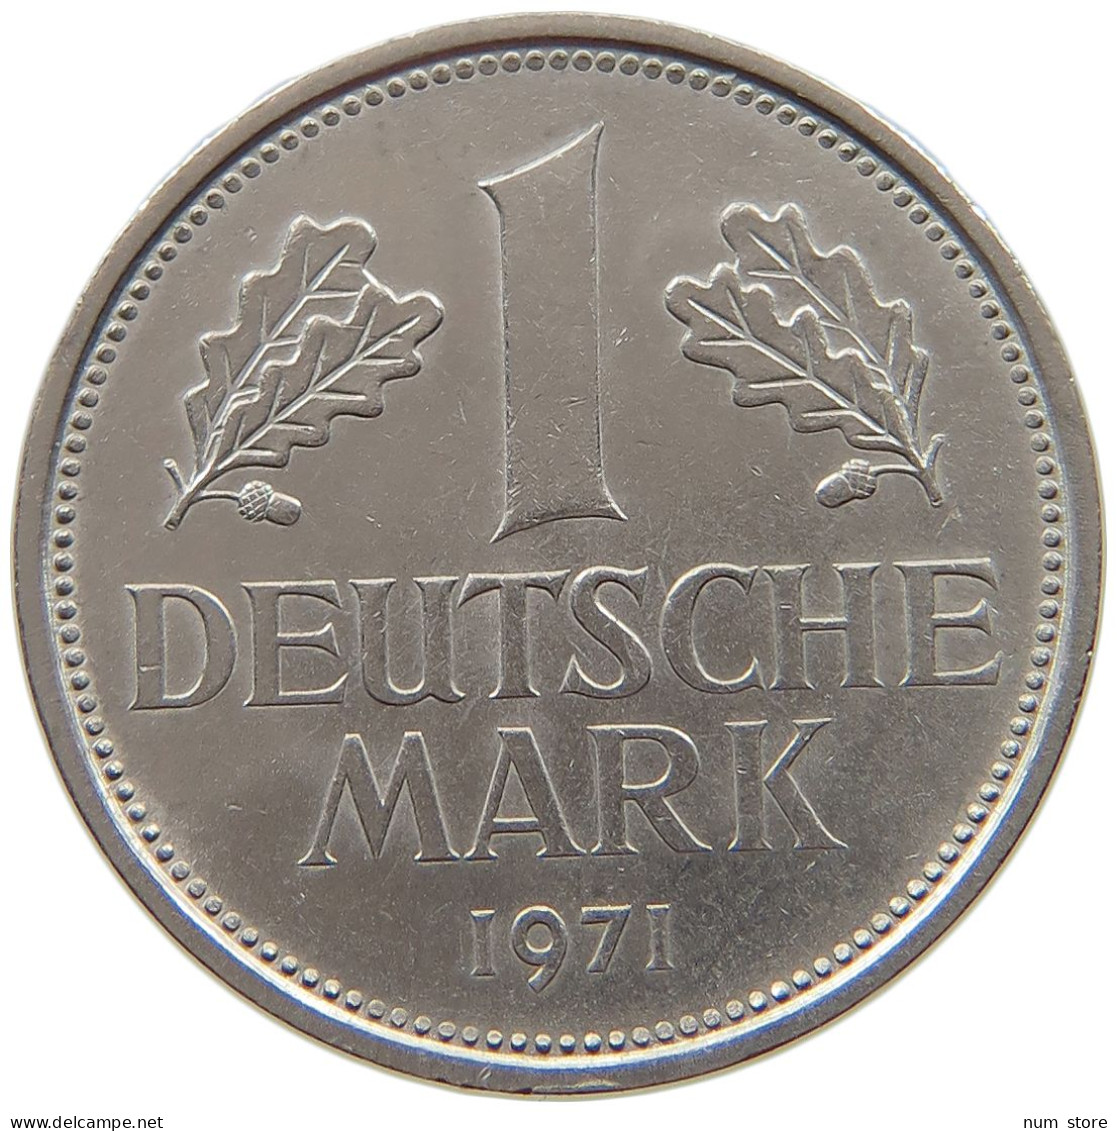 GERMANY WEST 1 MARK 1971 D #a043 0487 - 1 Marco